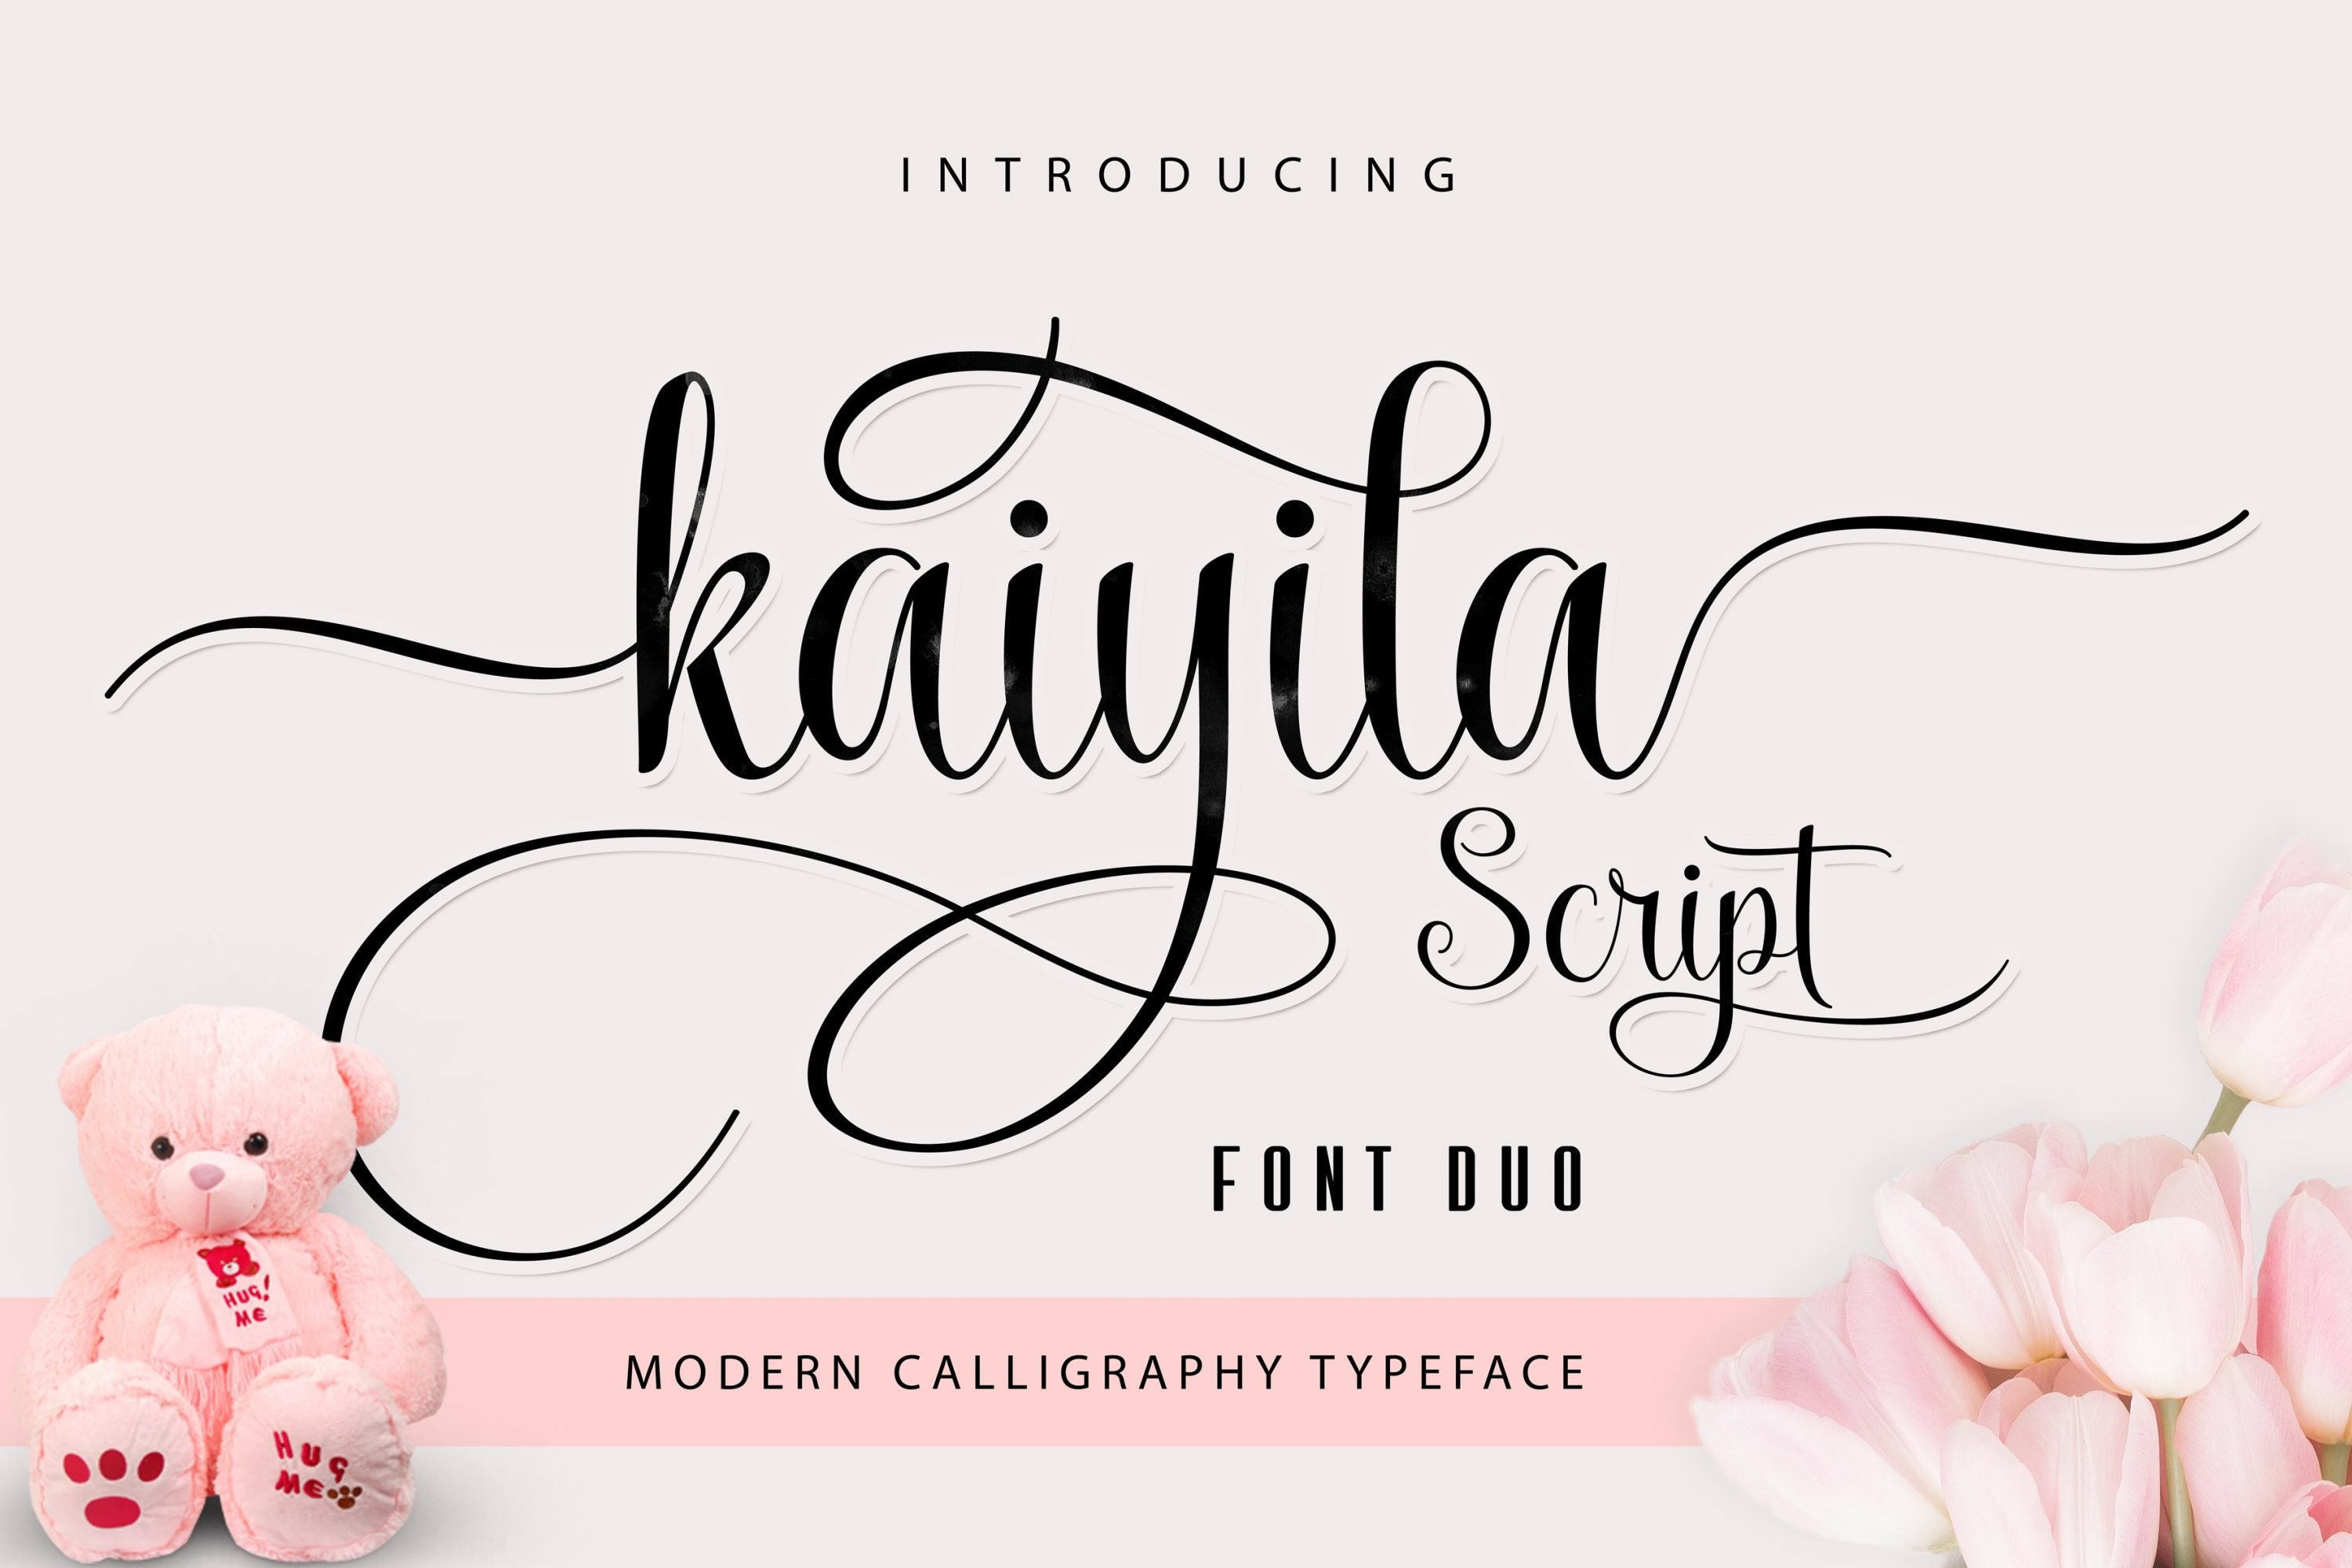 Font in italic style with flowers and a delicate atmosphere.